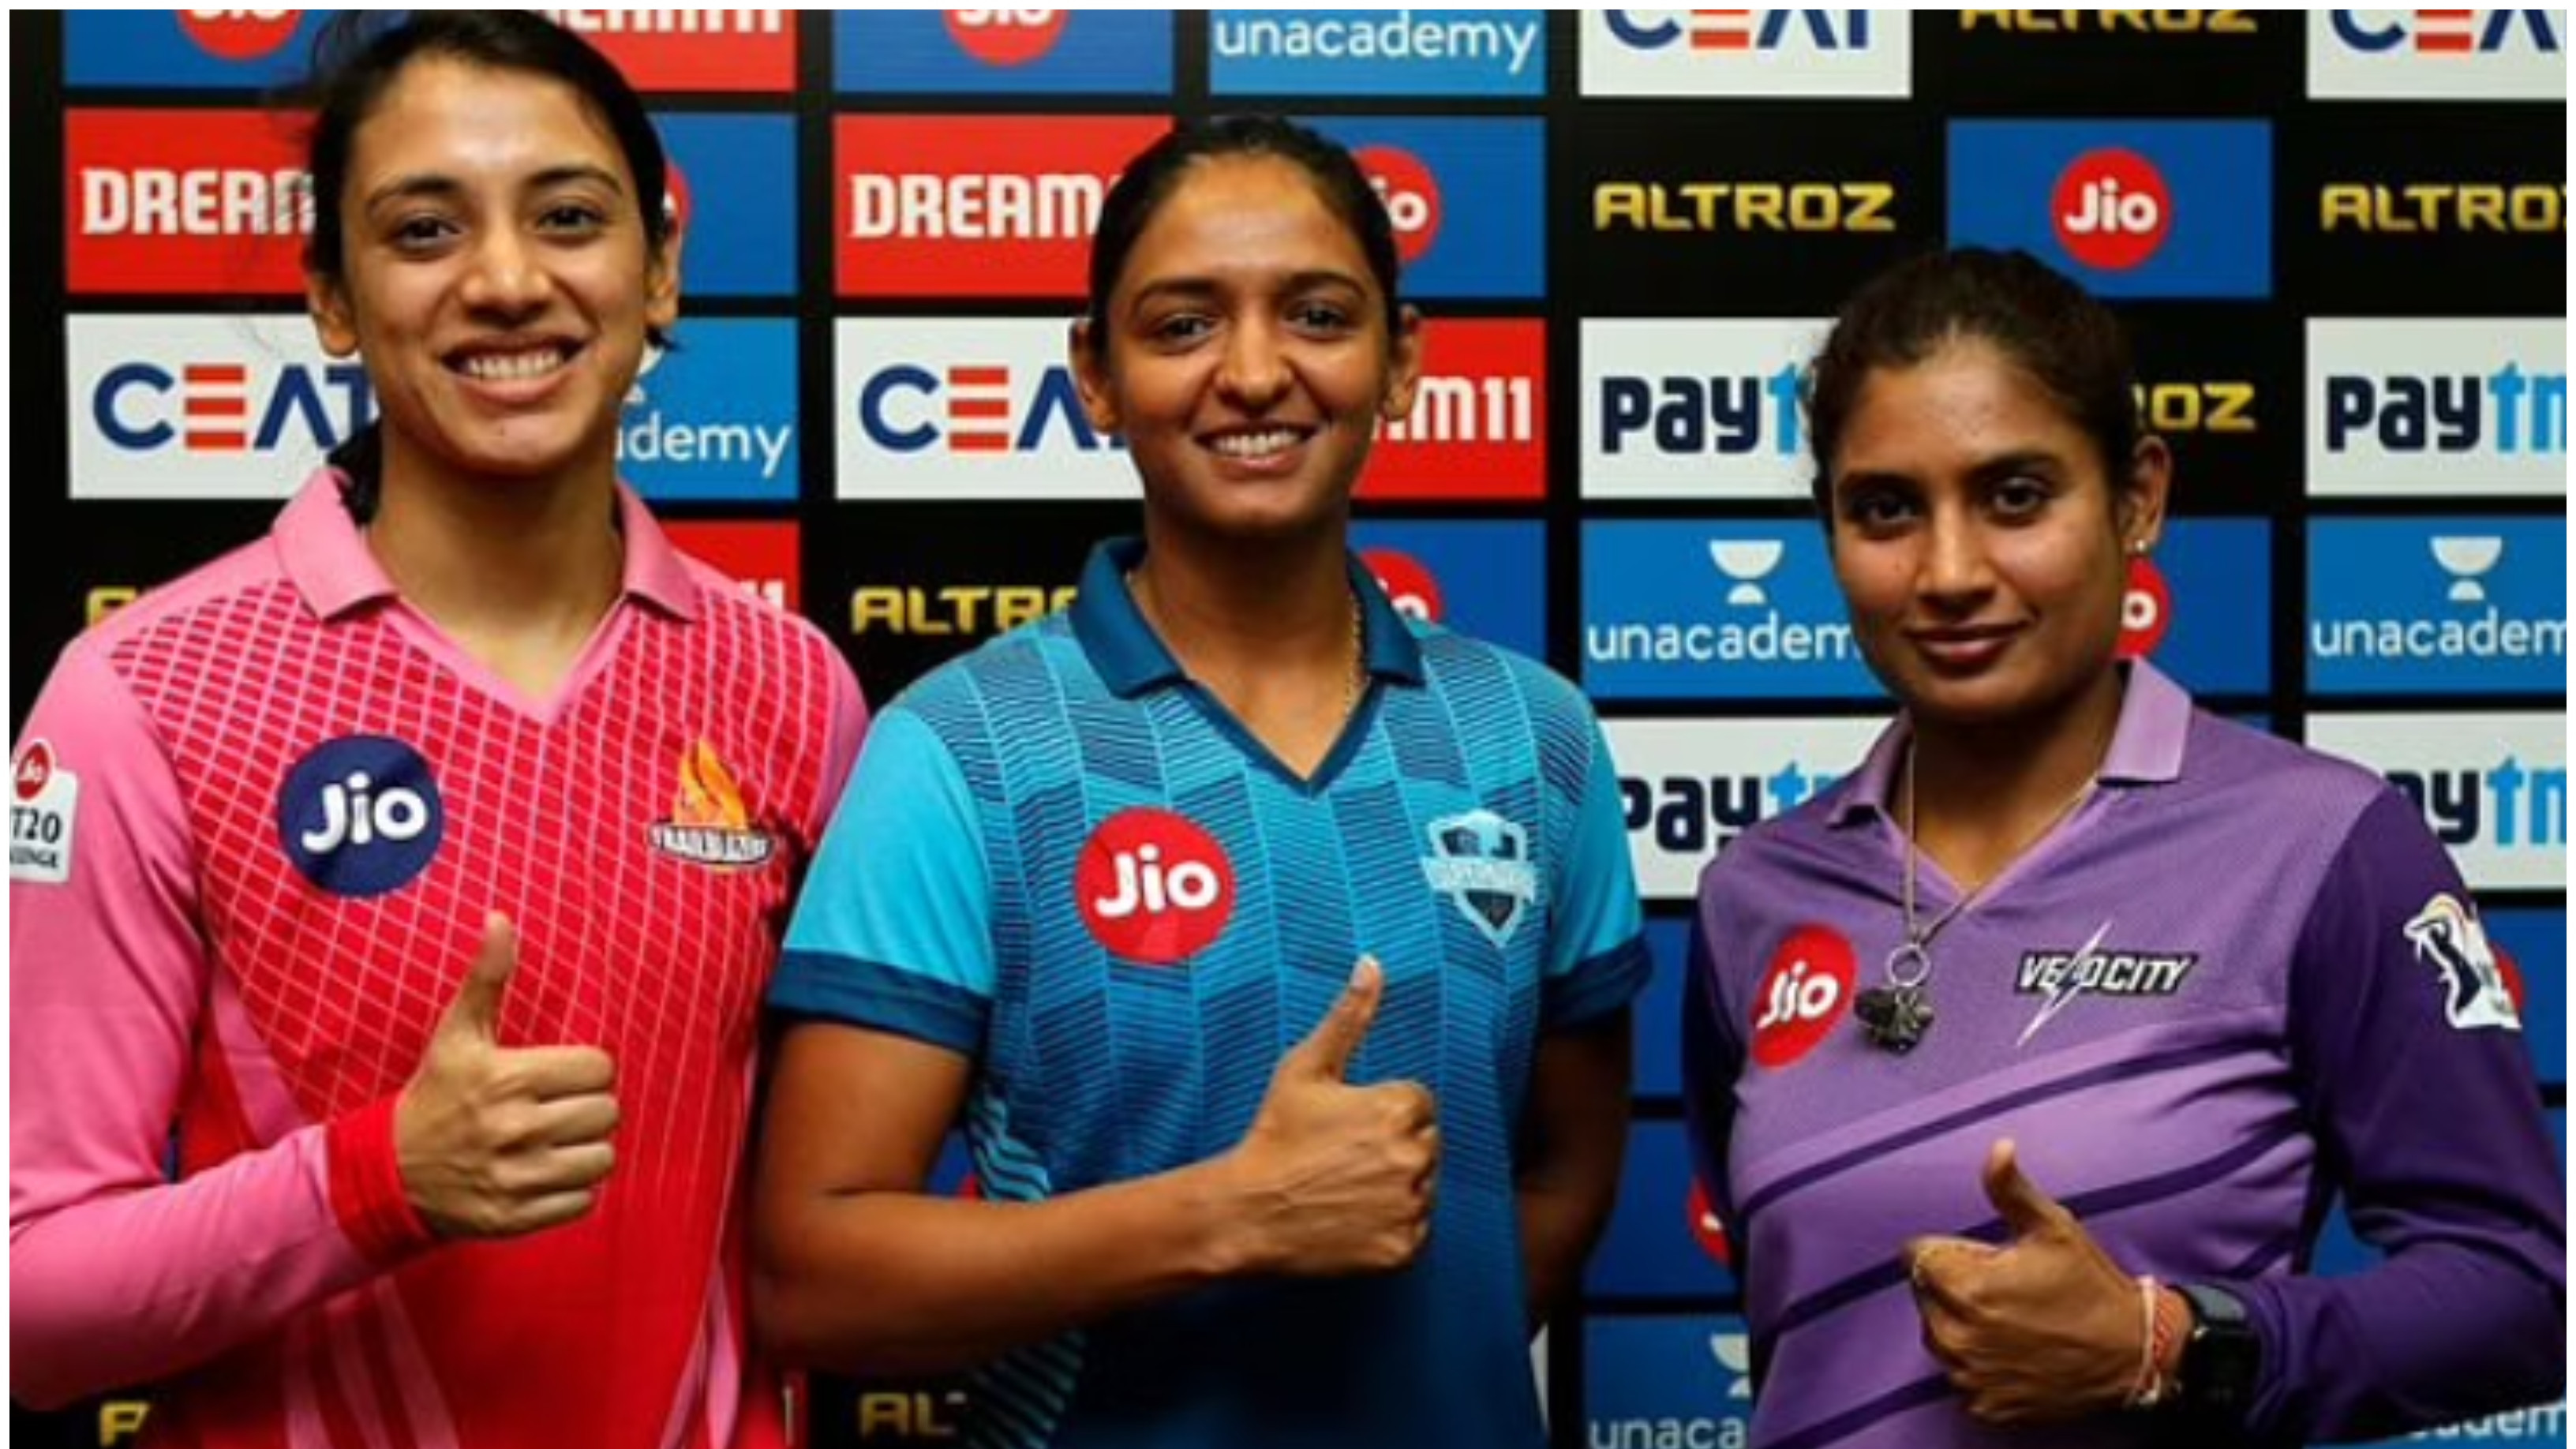 Inaugural Women’s IPL likely to kick-off in March 2023: Report